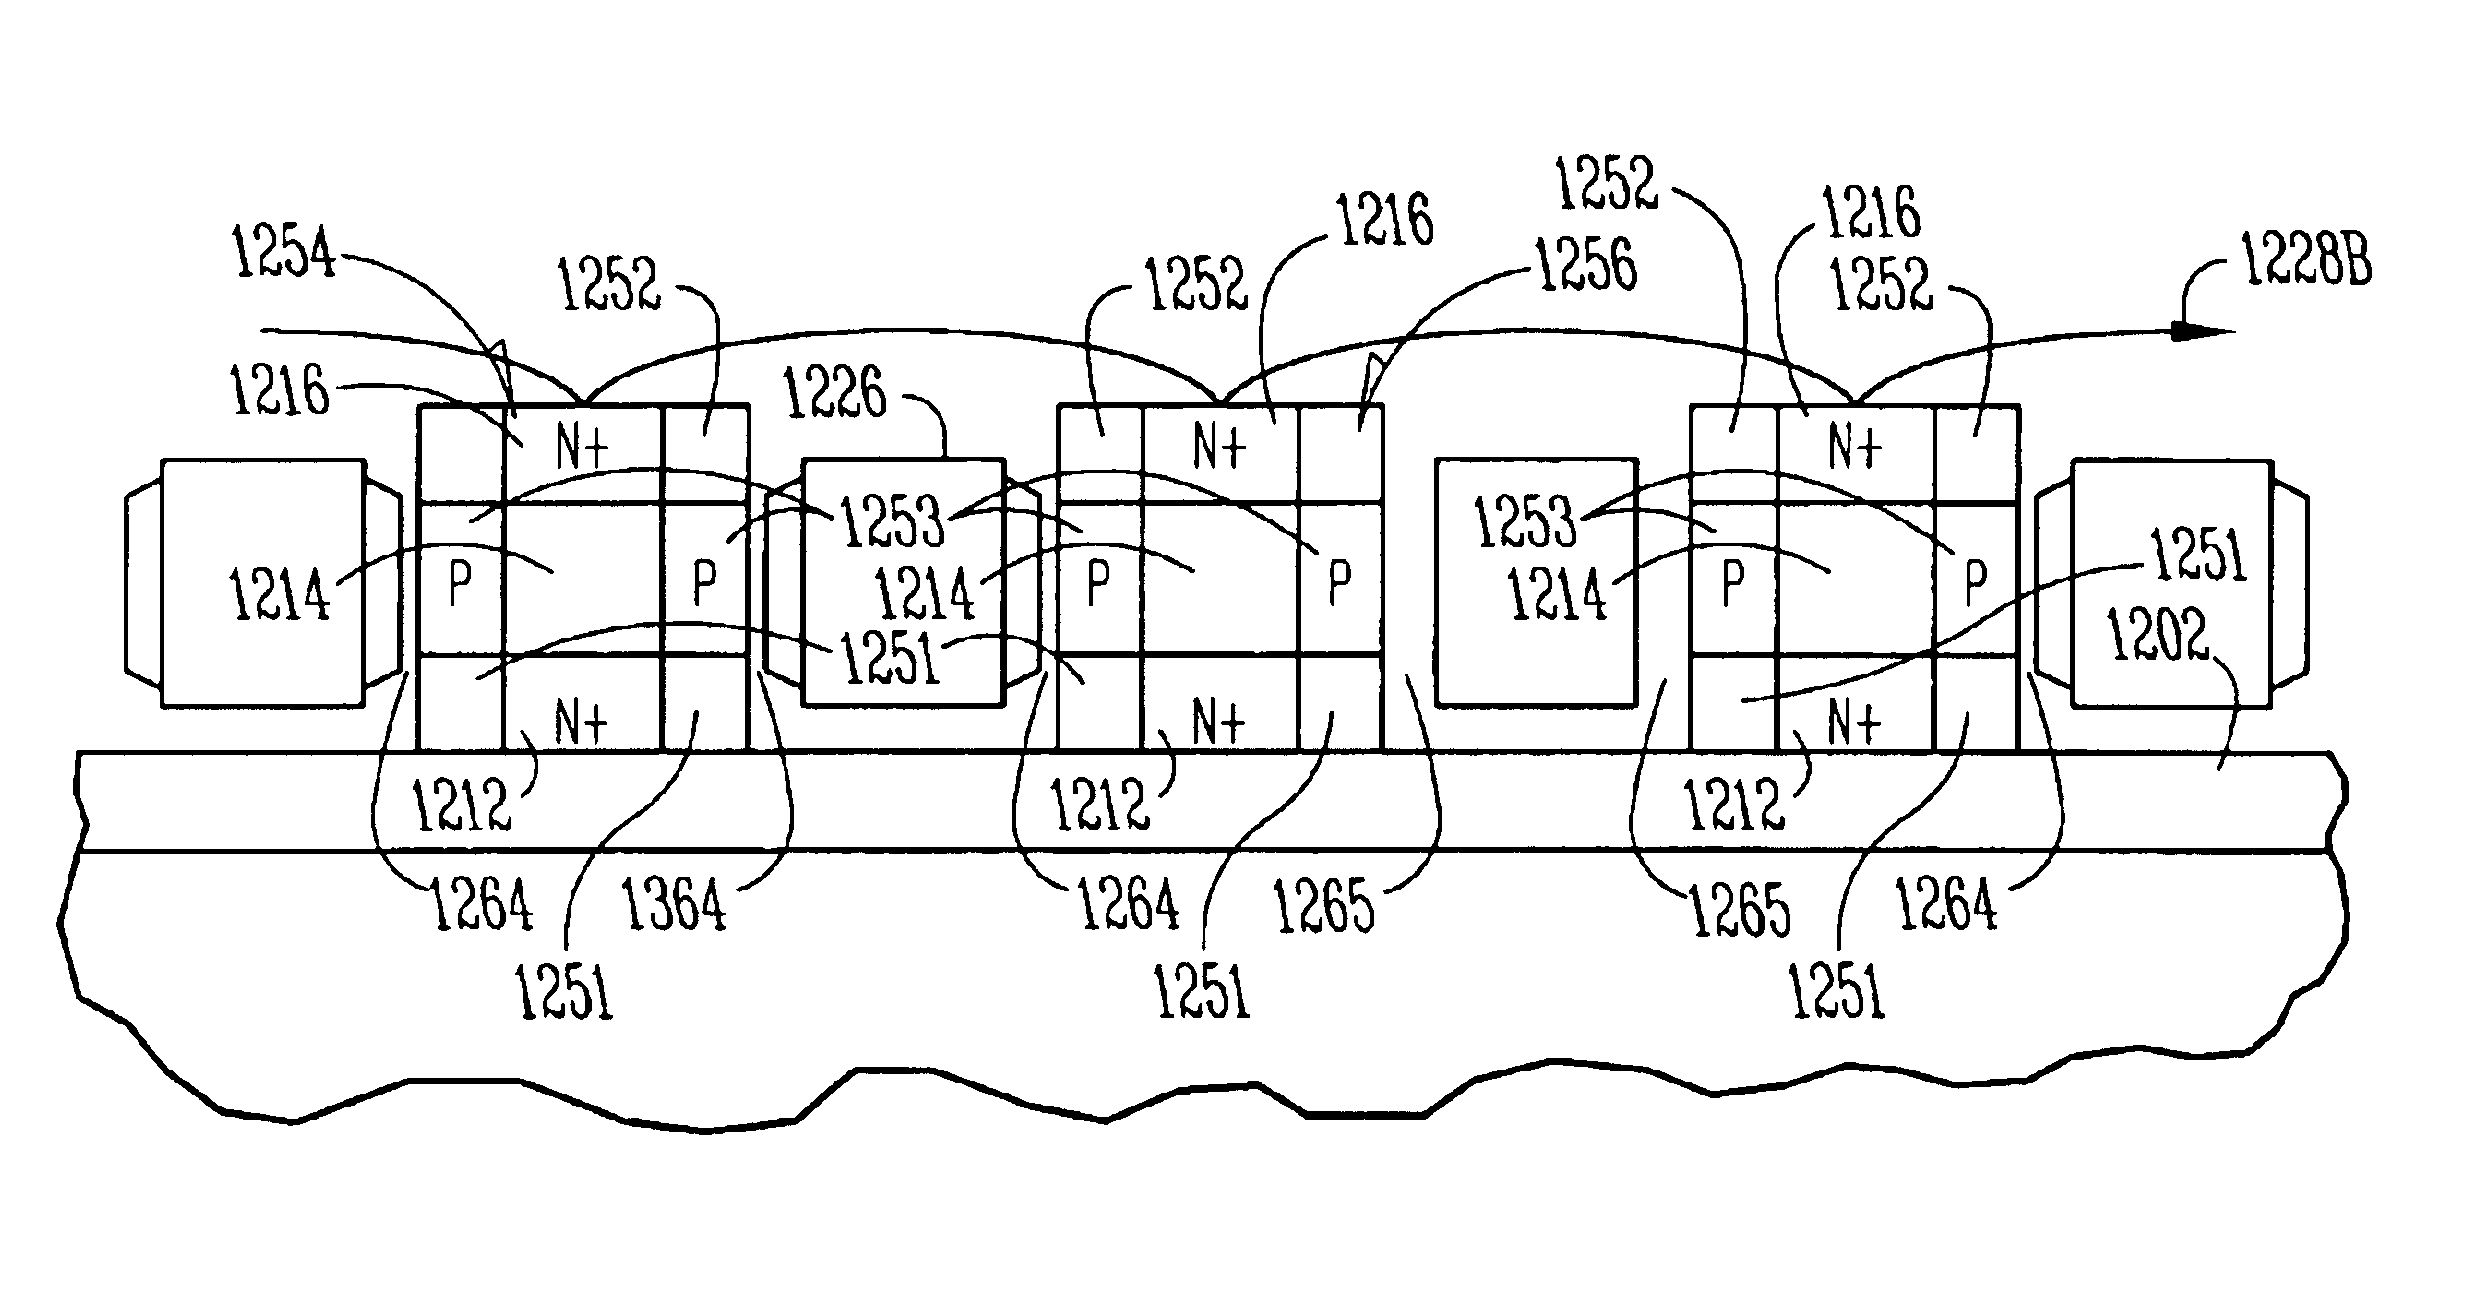 Programmable logic arrays with ultra thin body transistors